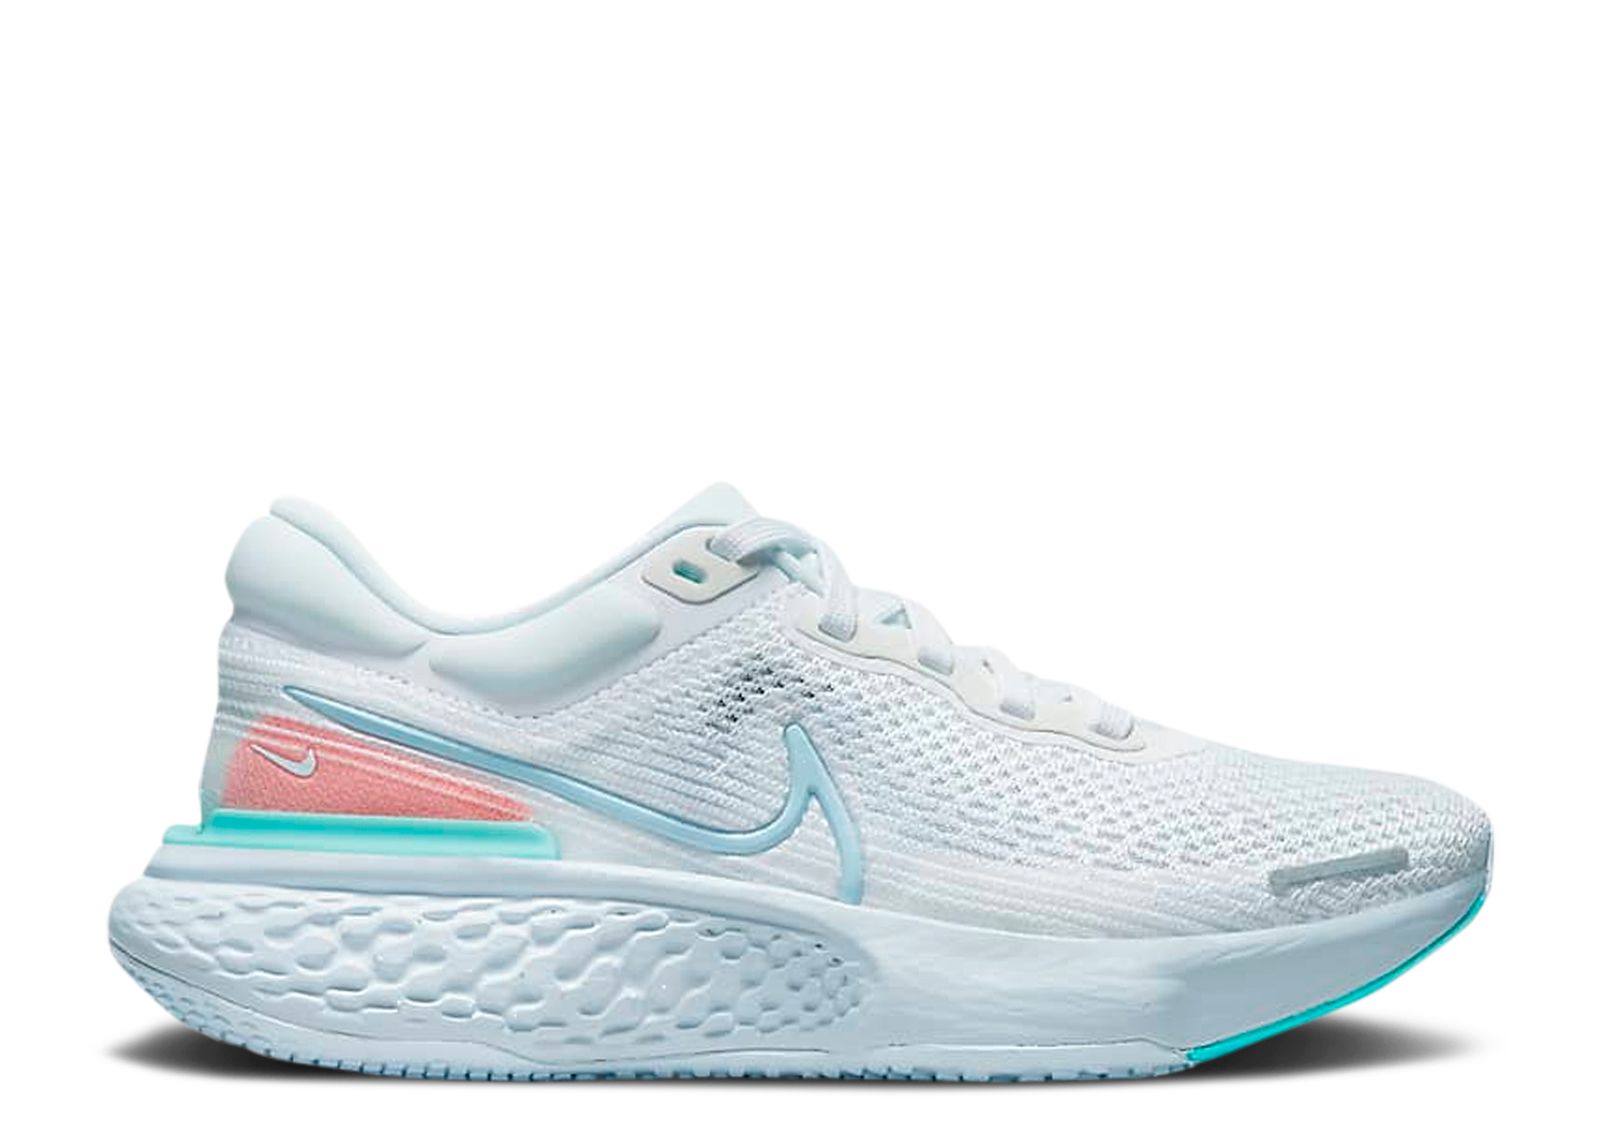 Кроссовки Nike Wmns Zoomx Invincible Run Flyknit 'White Dynamic Turquoise', белый